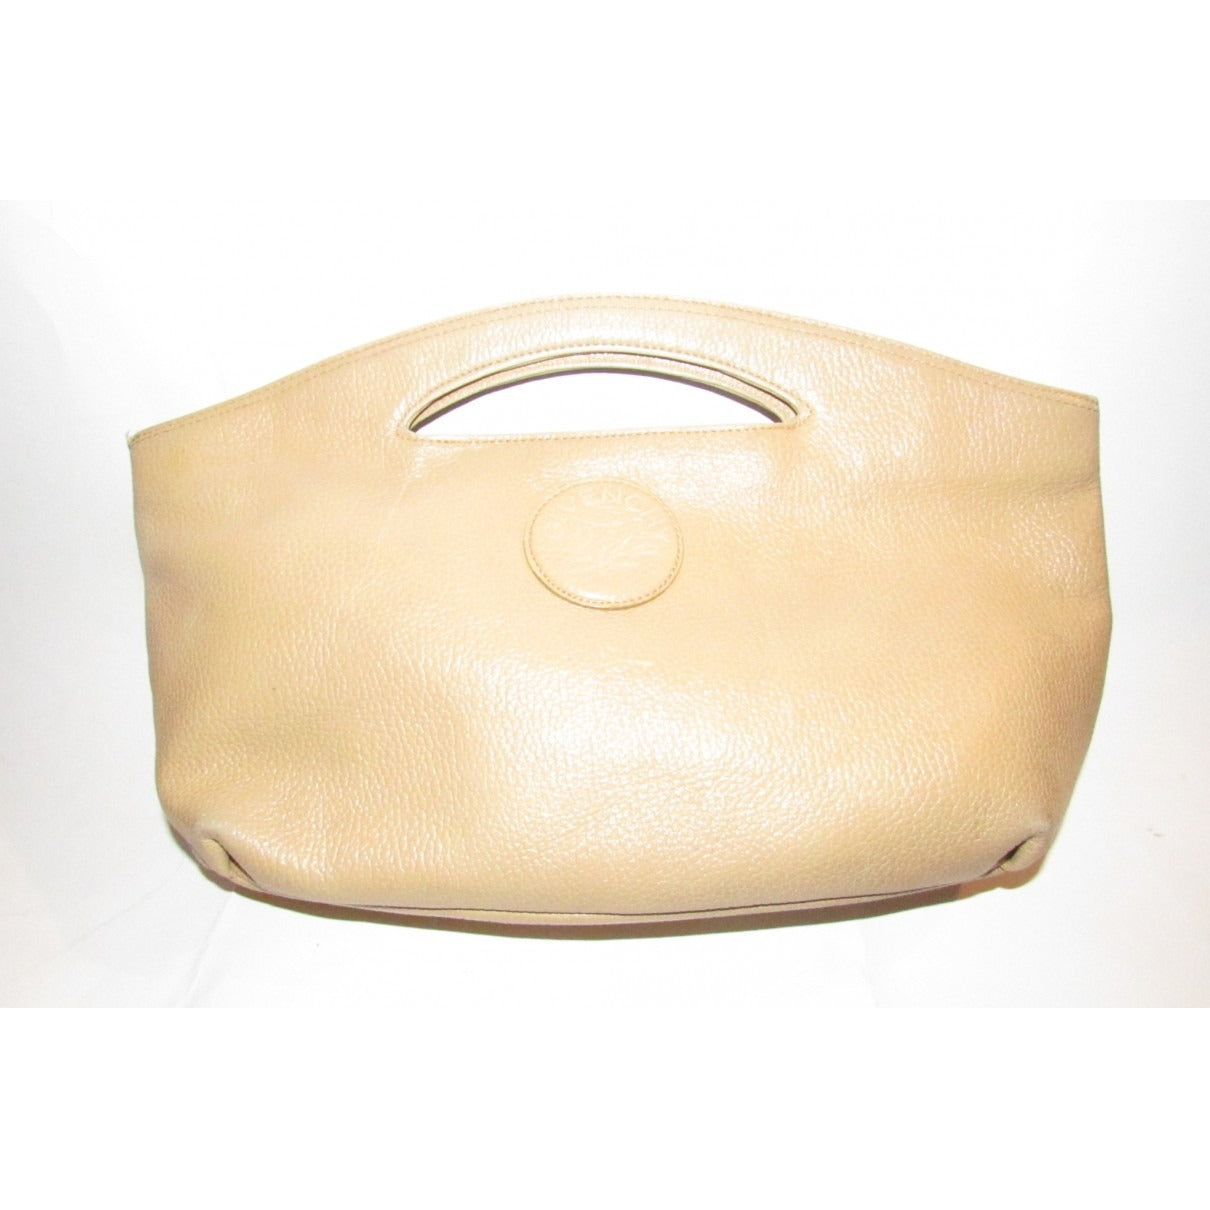 Vintage, Givenchy camel-coloured textured leather, large tote with a leather port hole/punch in the center of the top handle